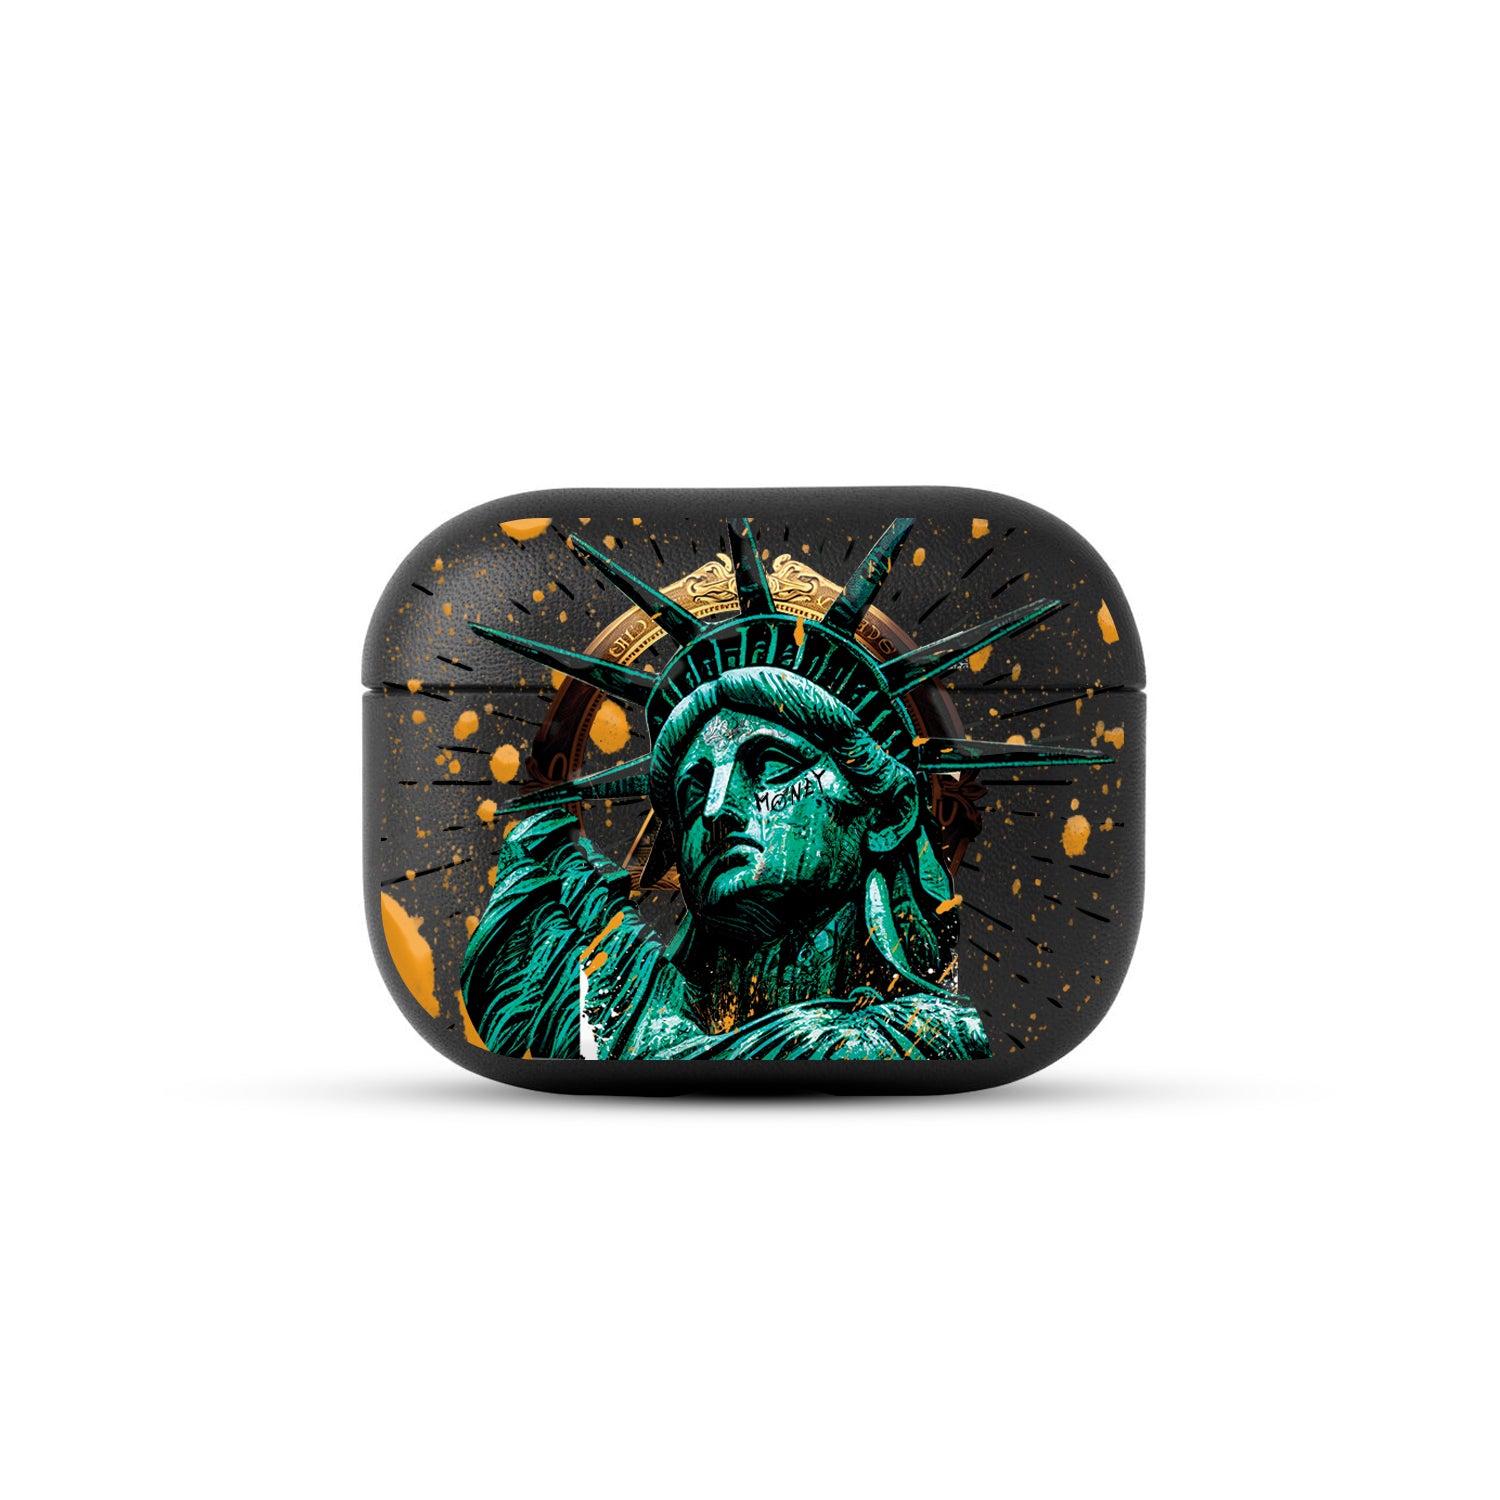 Etui Statue of Liberty do AirPods